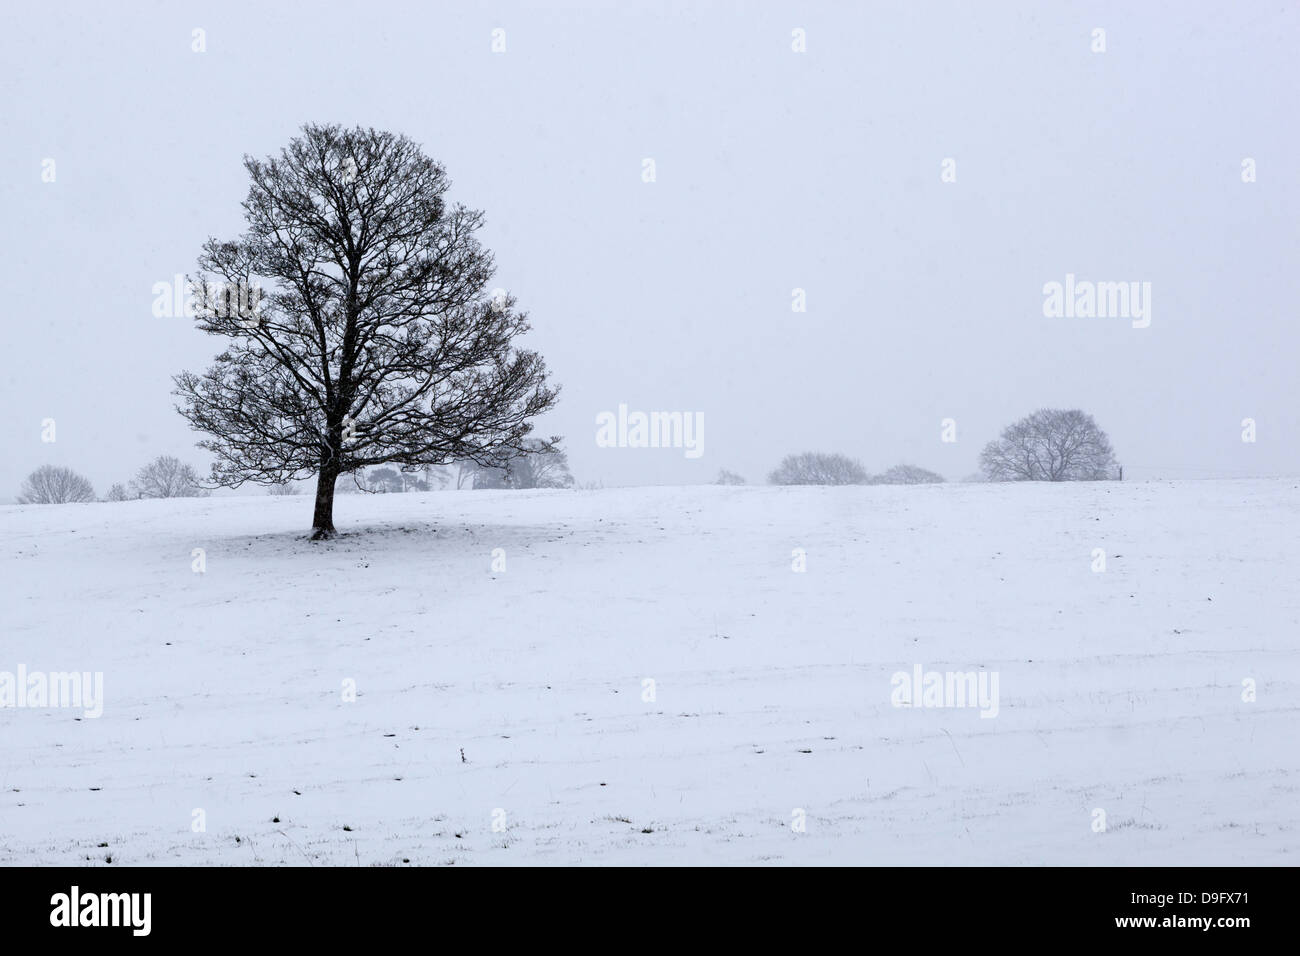 Snowy landscape with trees, Broadwell, Gloucestershire, Cotswolds, England, UK Stock Photo